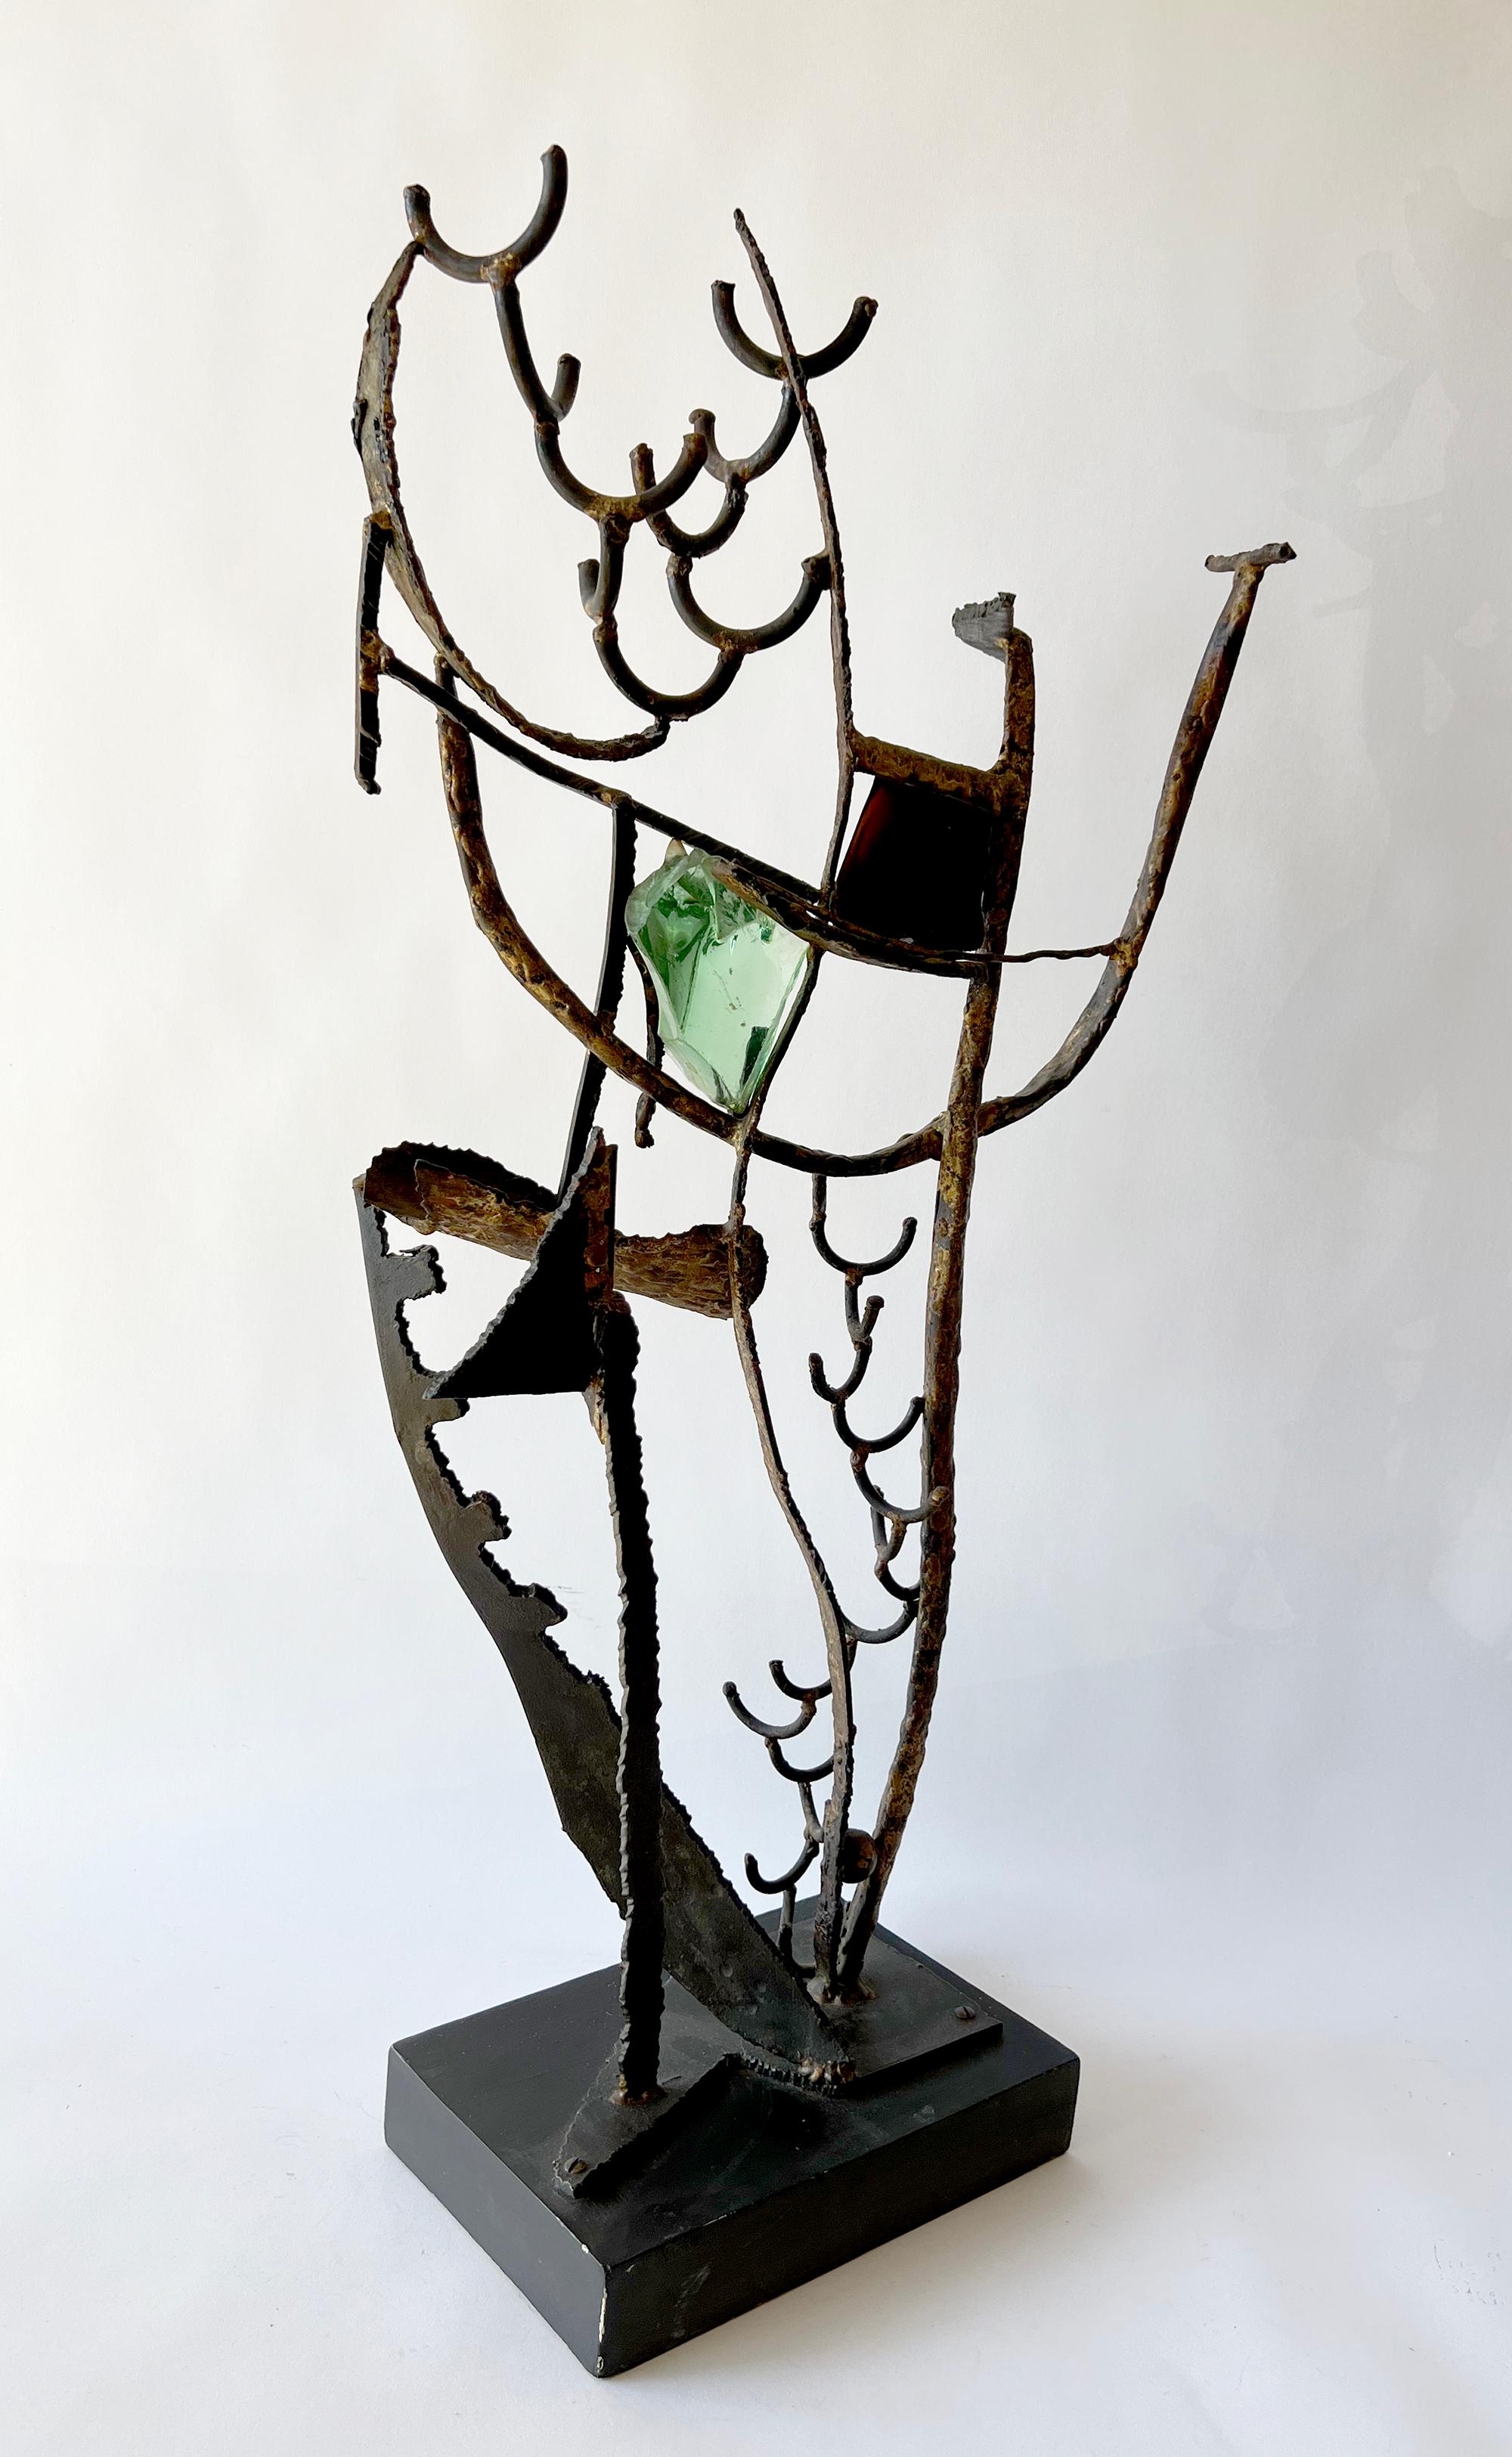 1950s Leon Saulter California Abstract Modern Iron Glass Sculpture In Good Condition For Sale In Palm Springs, CA